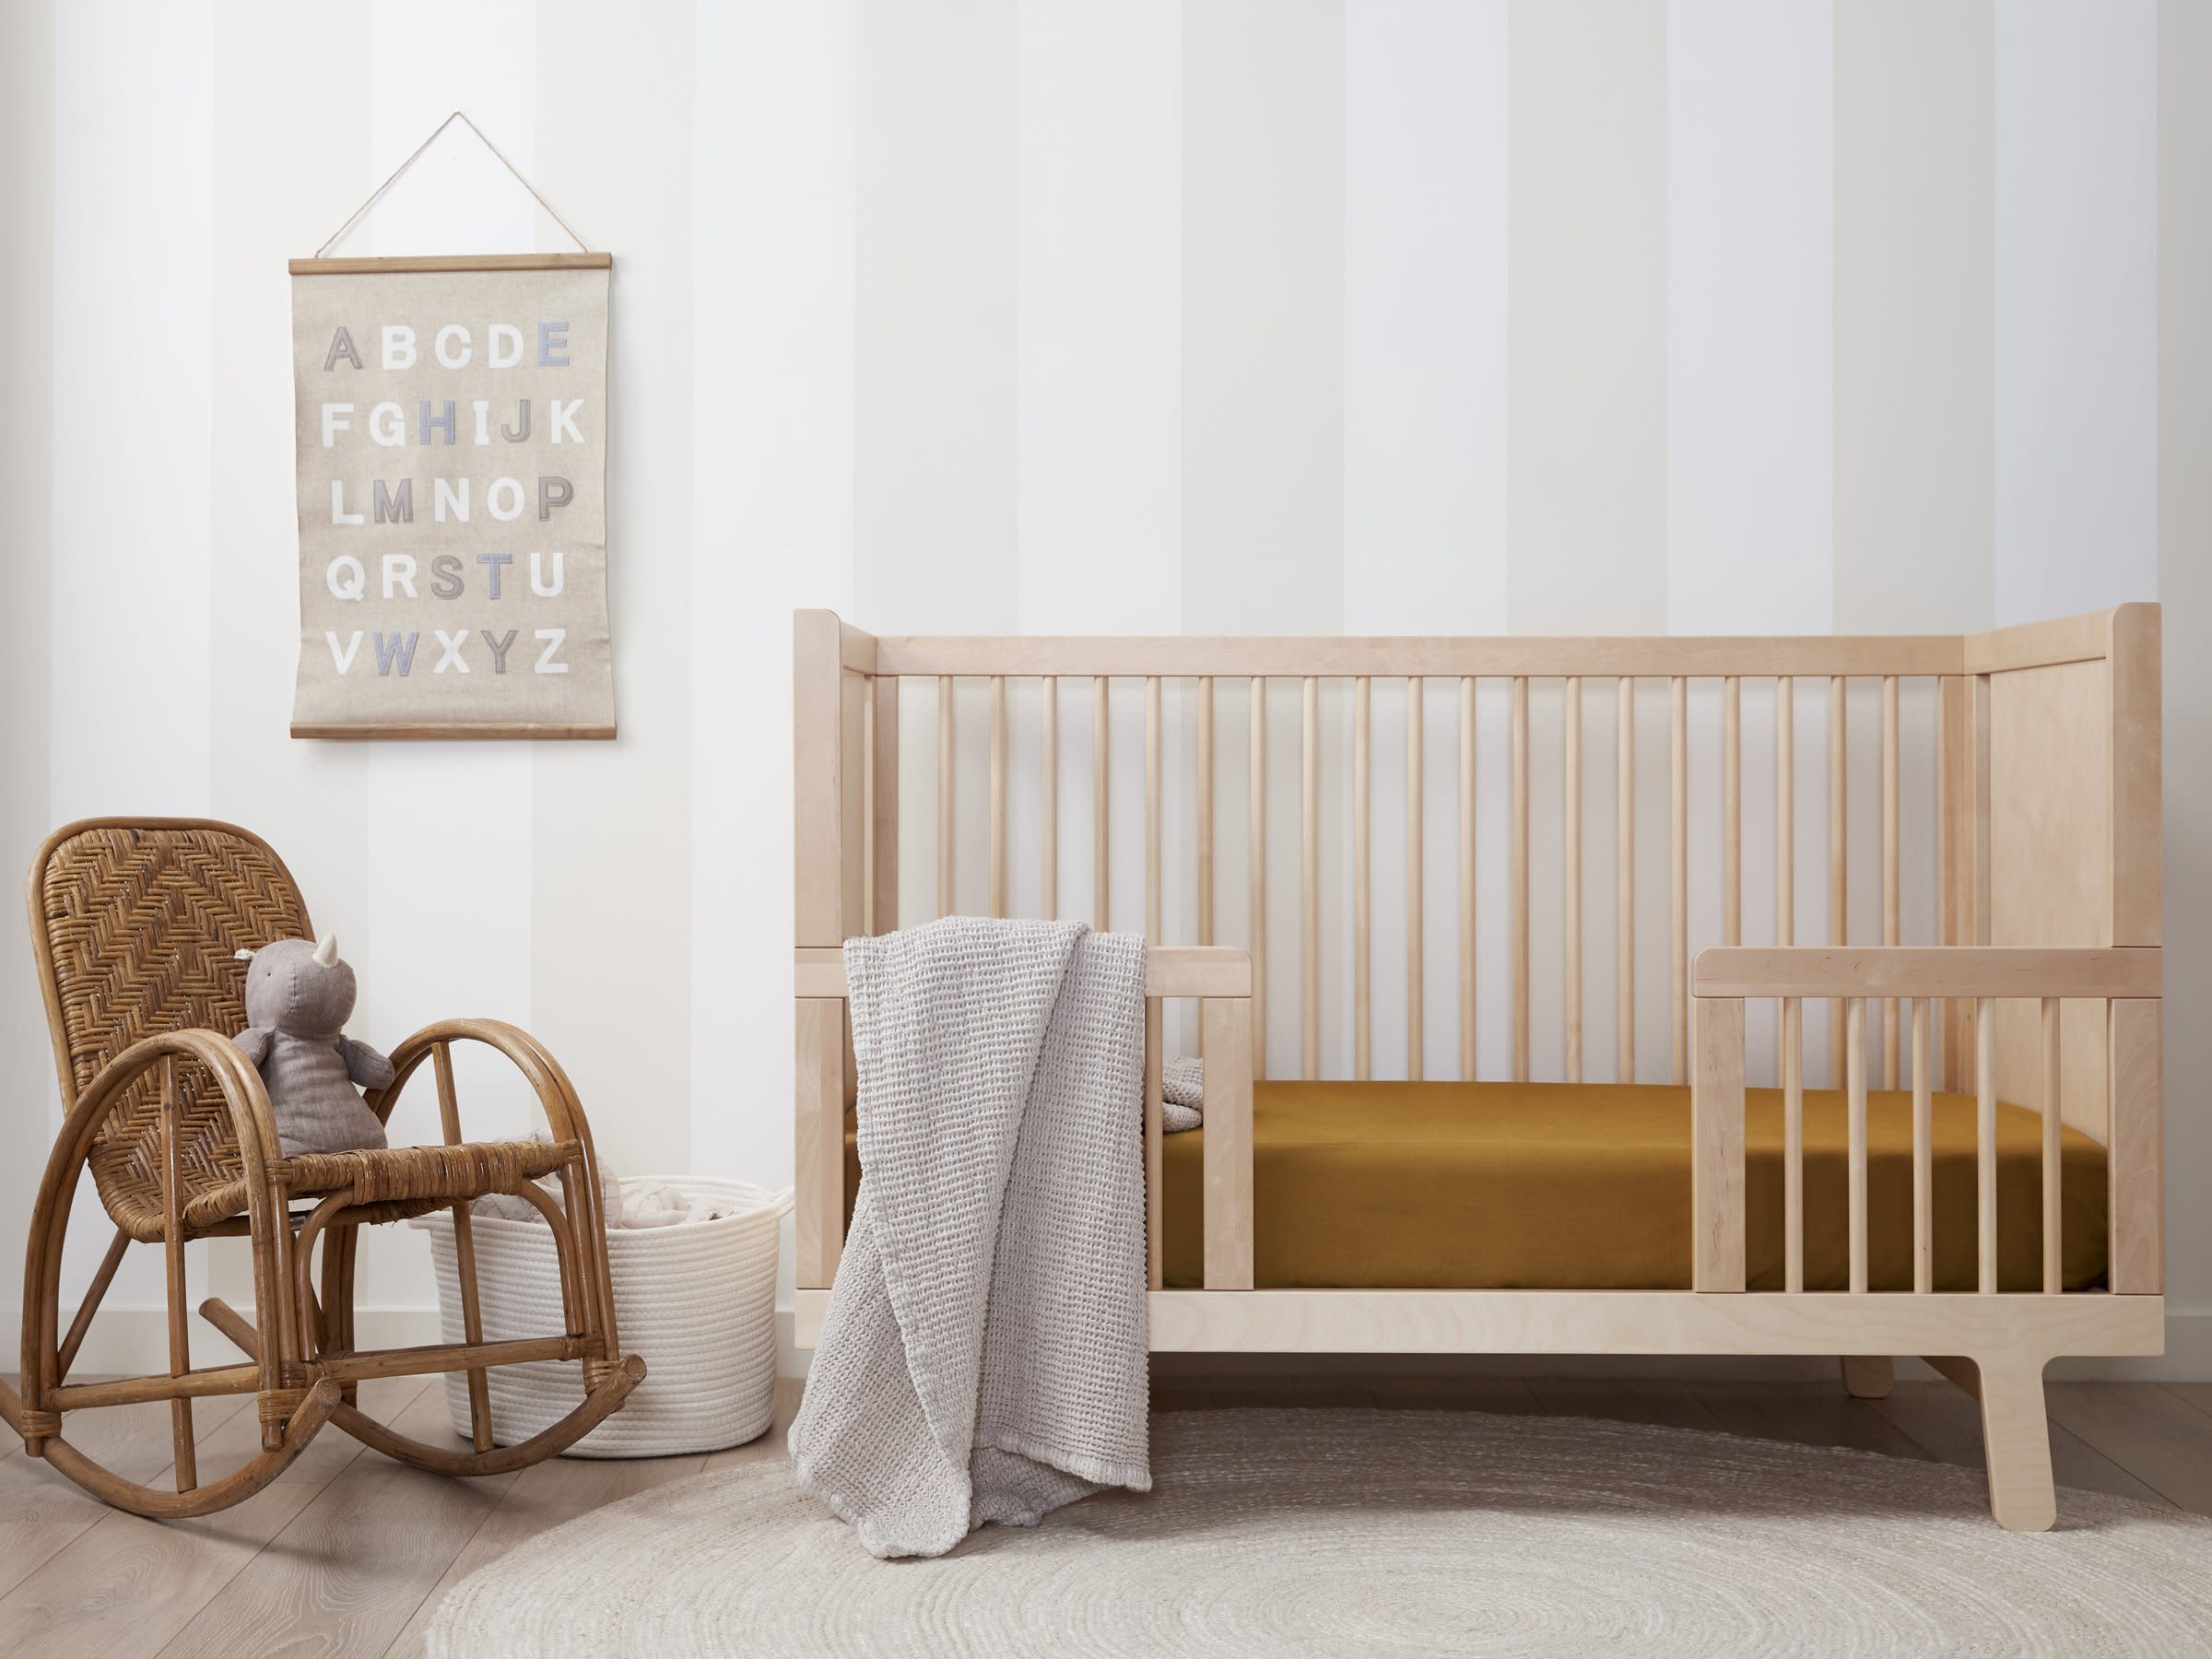 Ochre Brushed Cotton Crib Sheet Shown In A Room